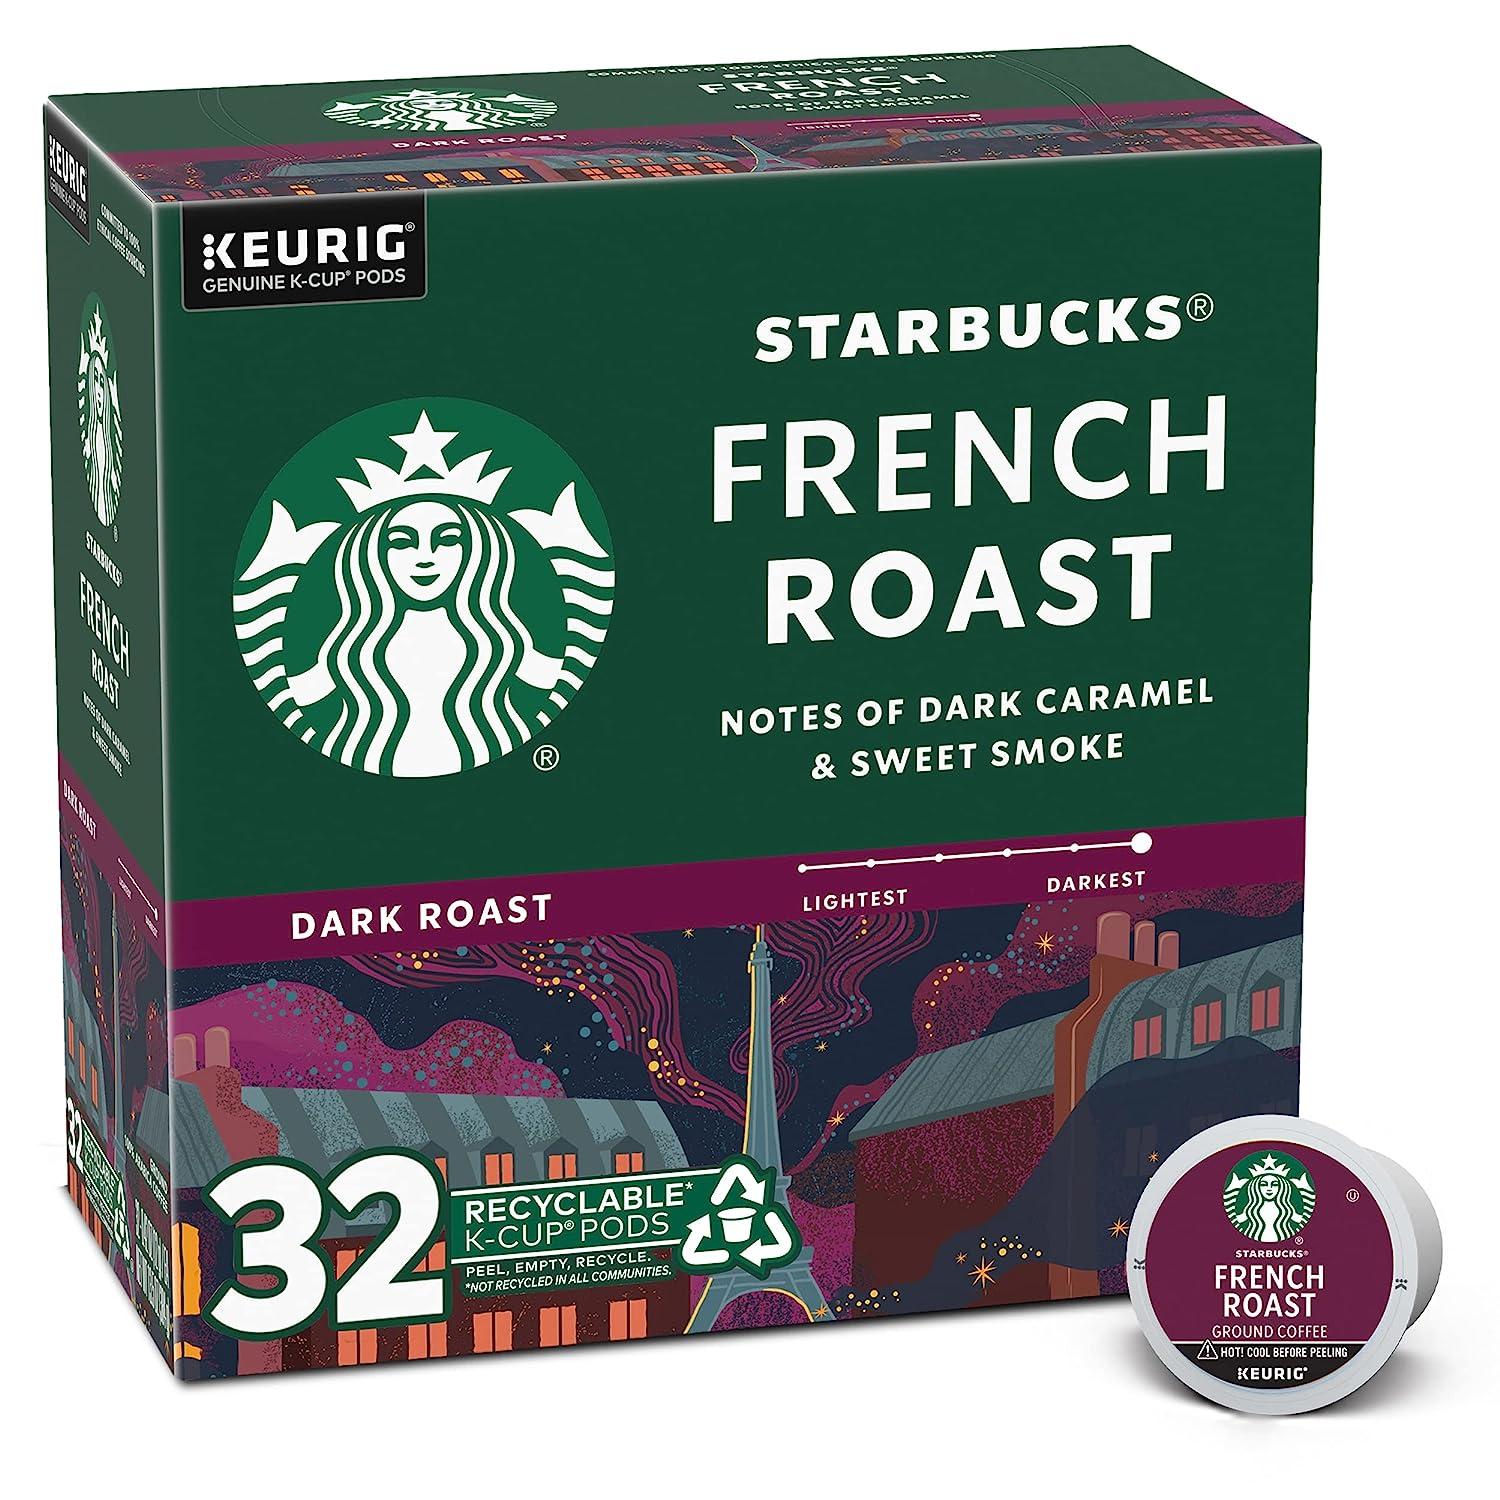 Starbucks Dark Roast French Roast K-Cup Coffee Pods 32 Pack for $13.29